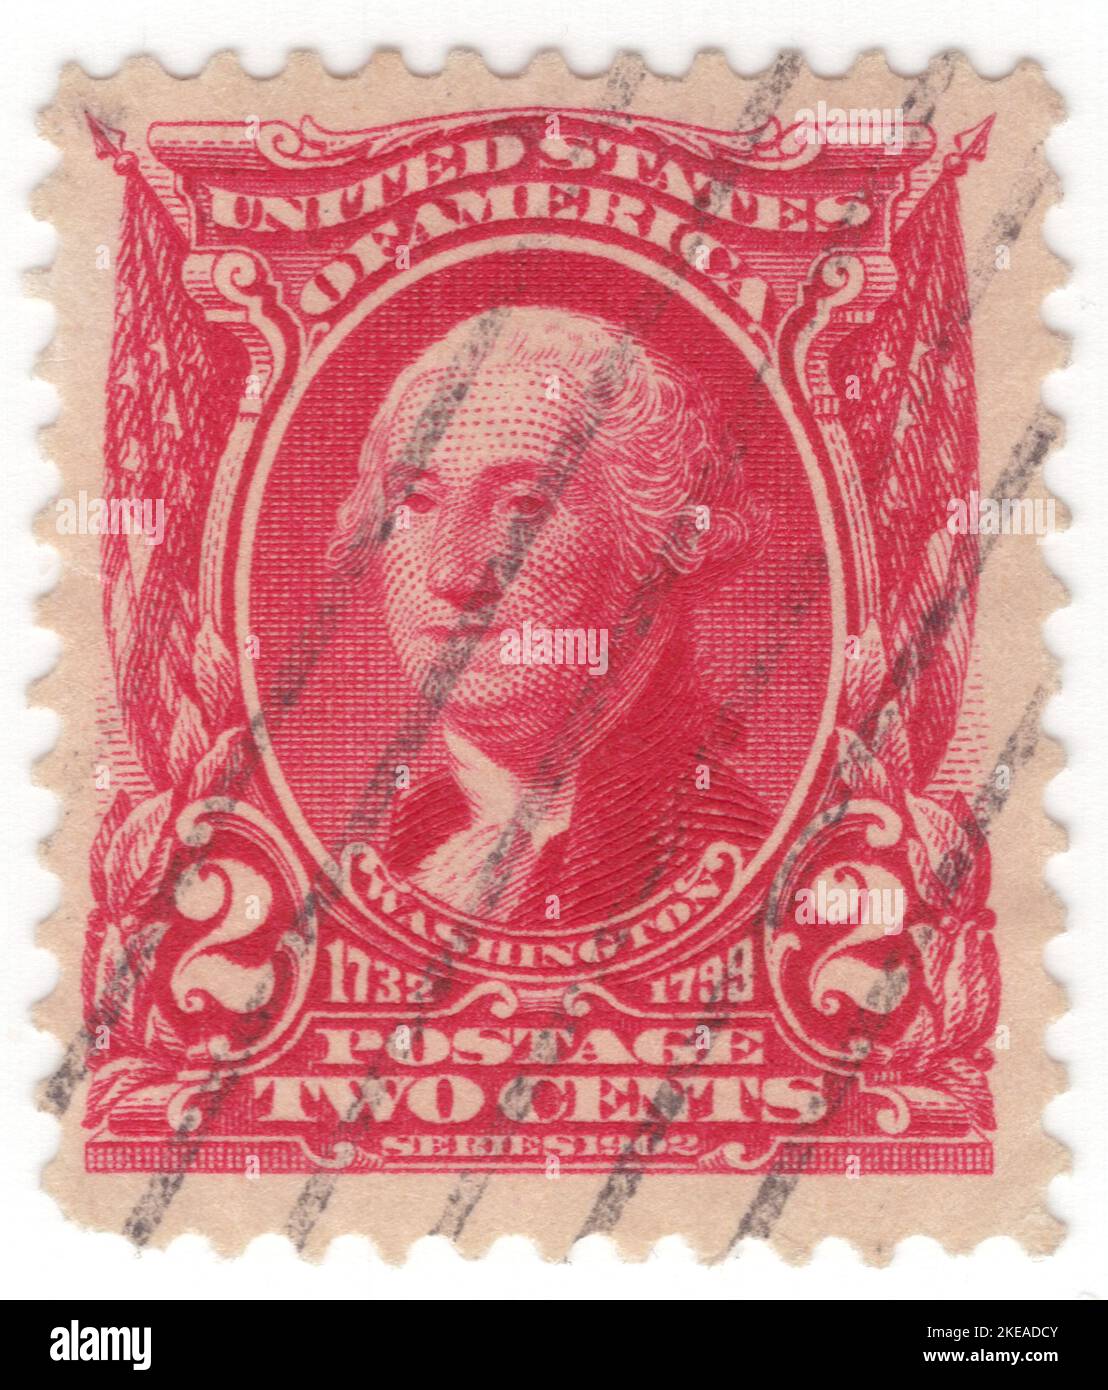 USA - 1903: An 2 cents carmine postage stamp depicting portrait of George Washington. American military officer, statesman, and Founding Father who served as the first president of the United States from 1789 to 1797. Appointed by the Continental Congress as commander of the Continental Army, Washington led the Patriot forces to victory in the American Revolutionary War and served as the president of the Constitutional Convention of 1787, which created the Constitution of the United States and the American federal government. Washington has been called the 'Father of his Country' Stock Photo